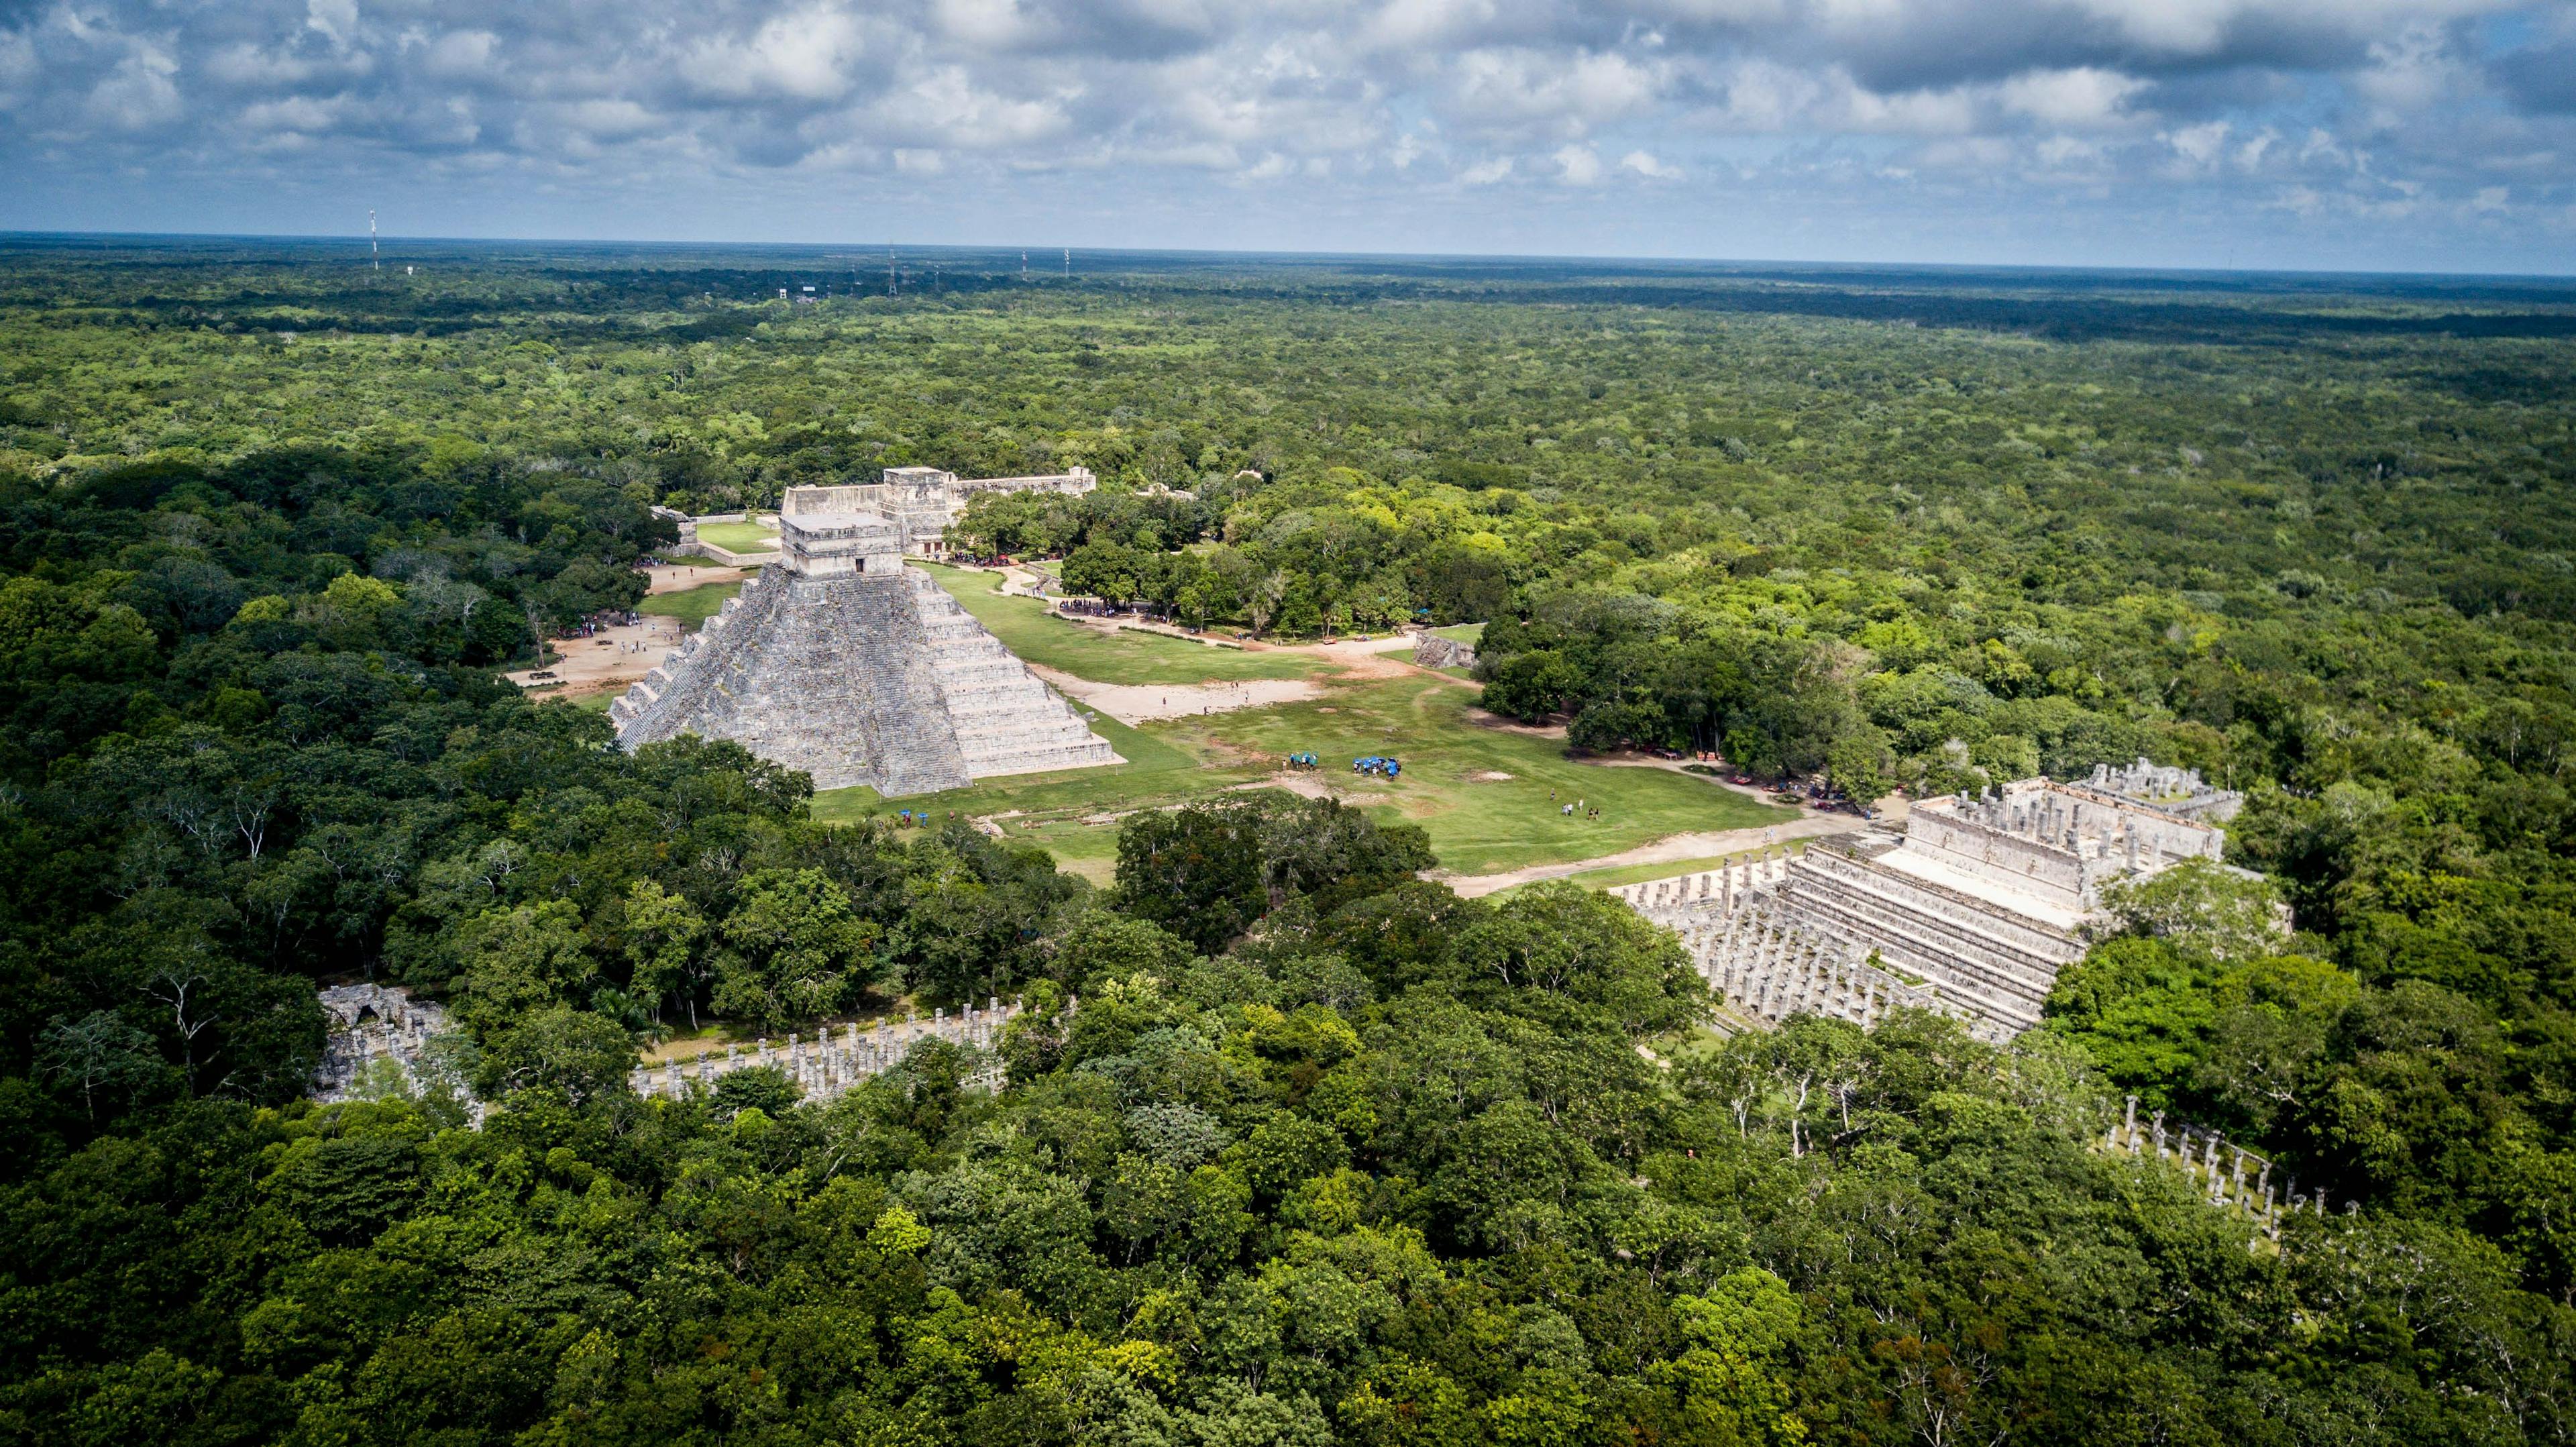 Aerial view of the pyramid, Calakmul, Campeche, Mexico